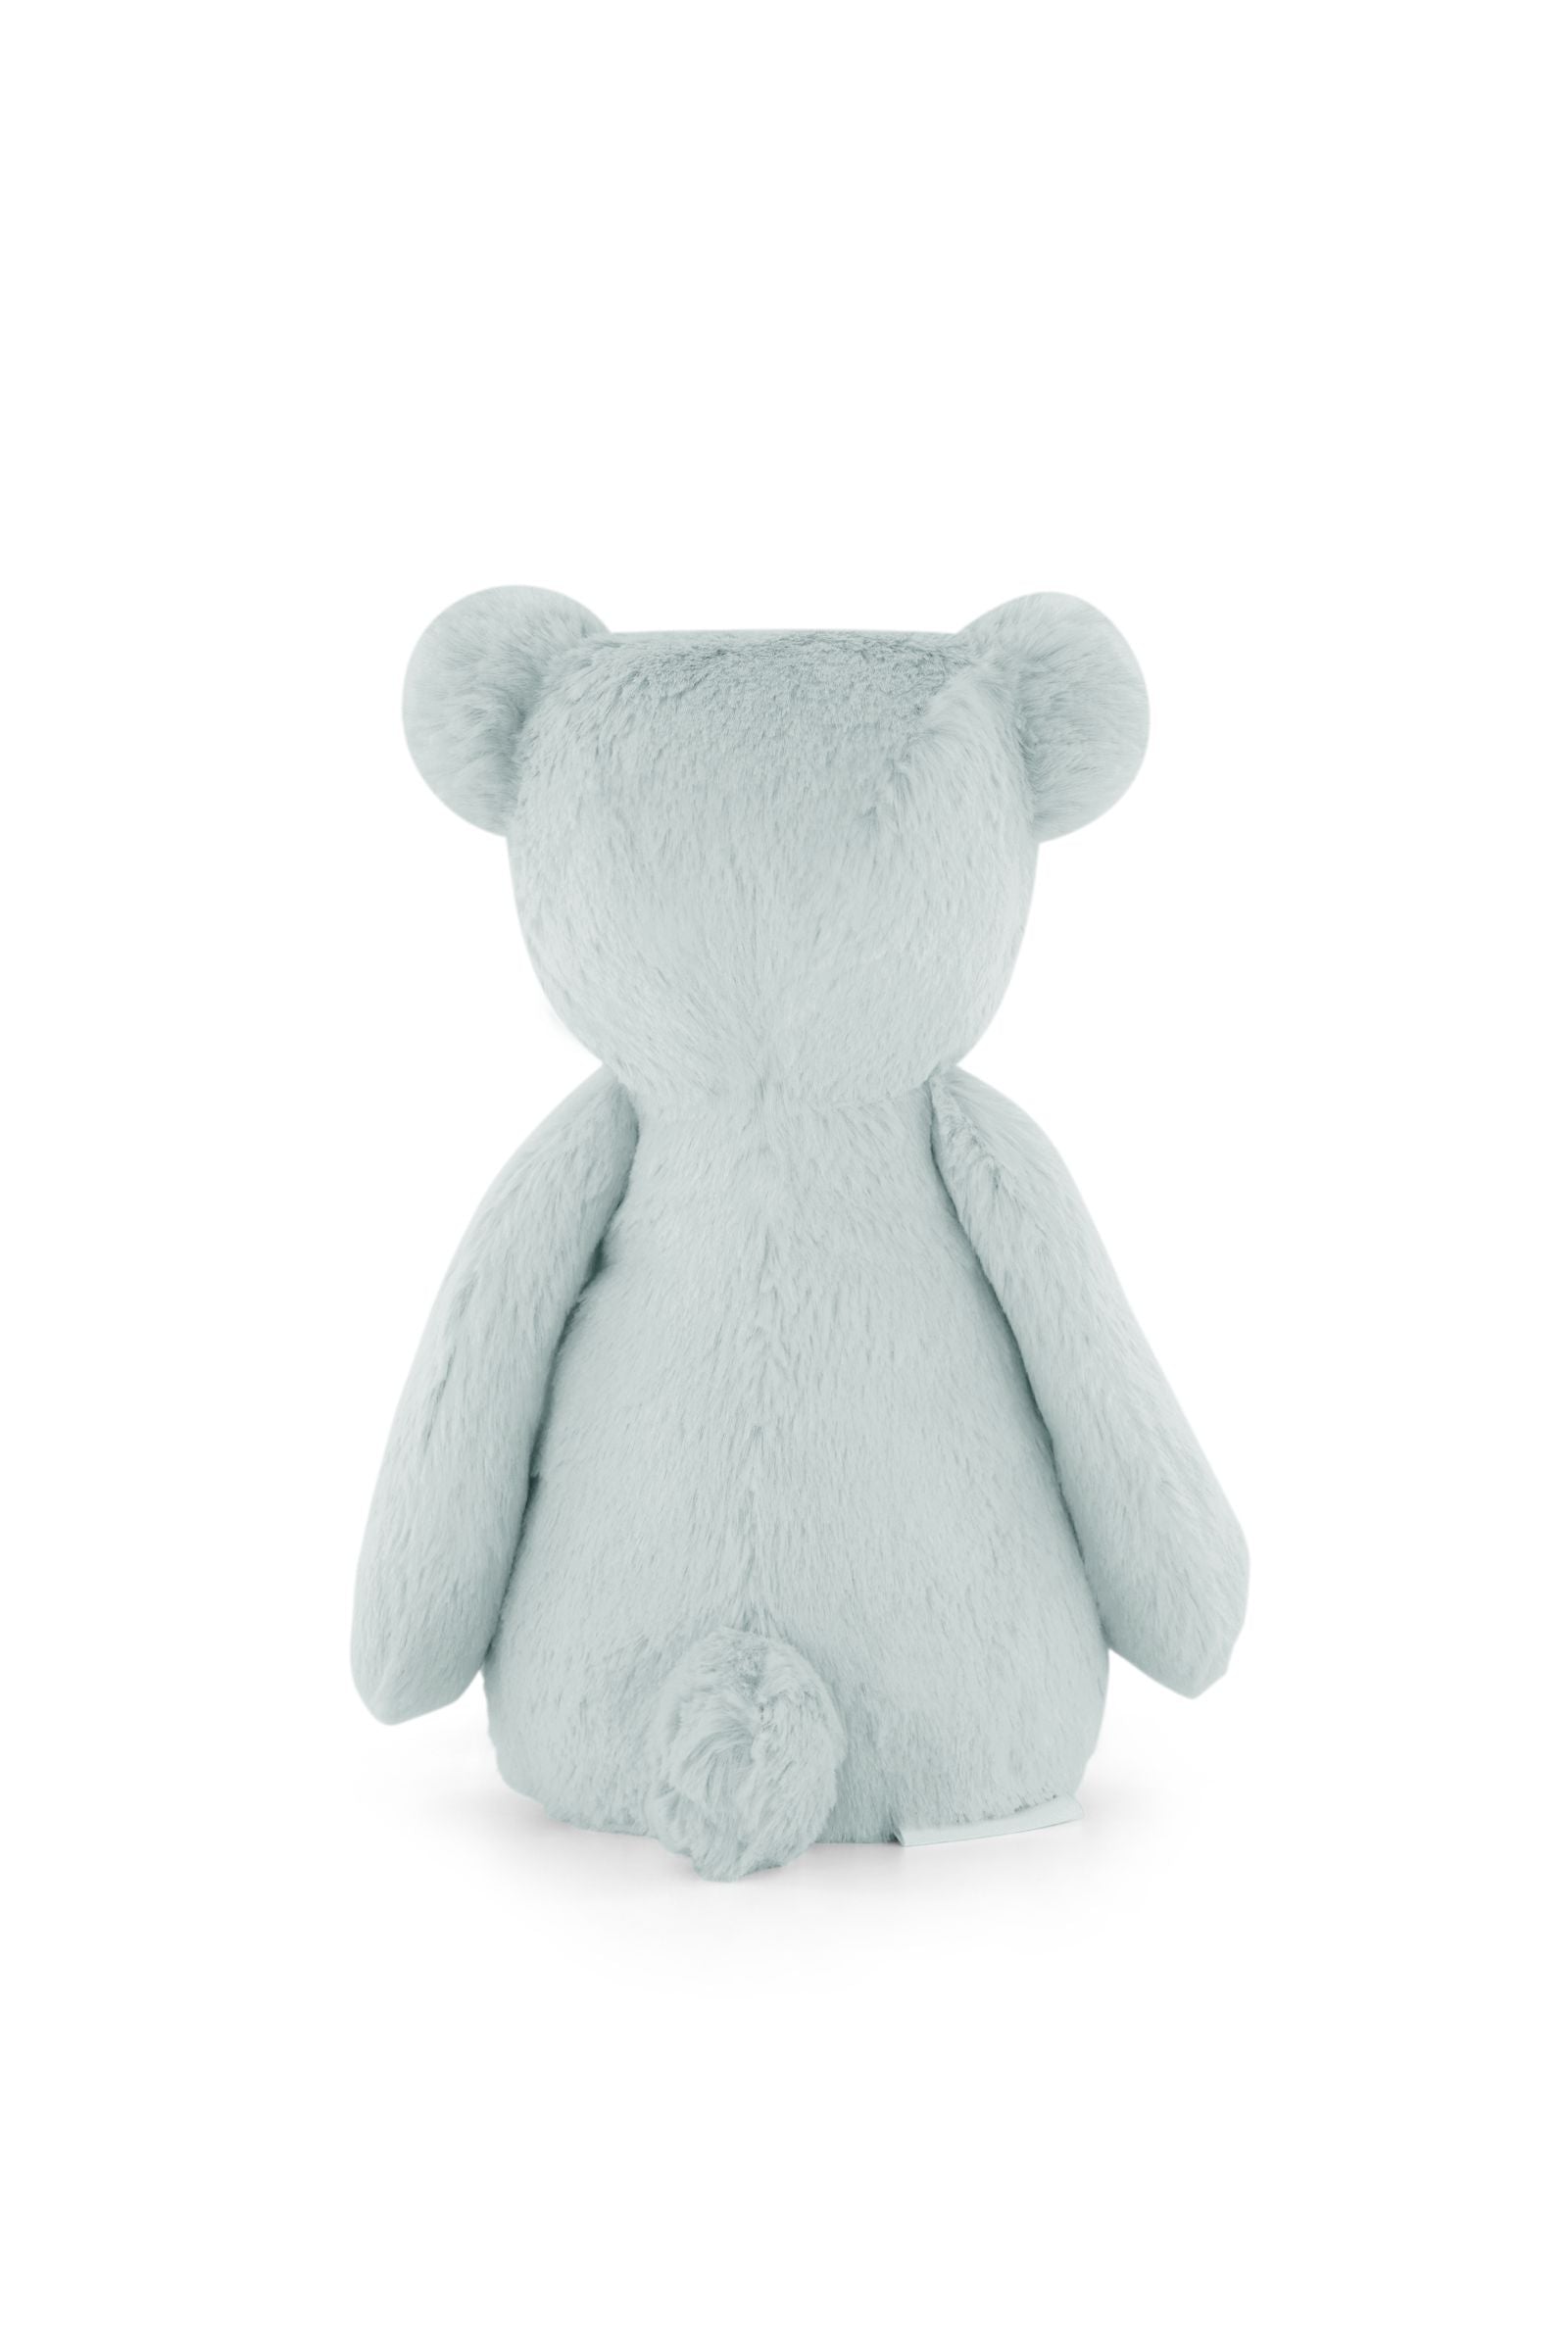 Snuggle Bunnies - George the Bear - Sprout 30cm-Toys-Jamie Kay-The Bay Room